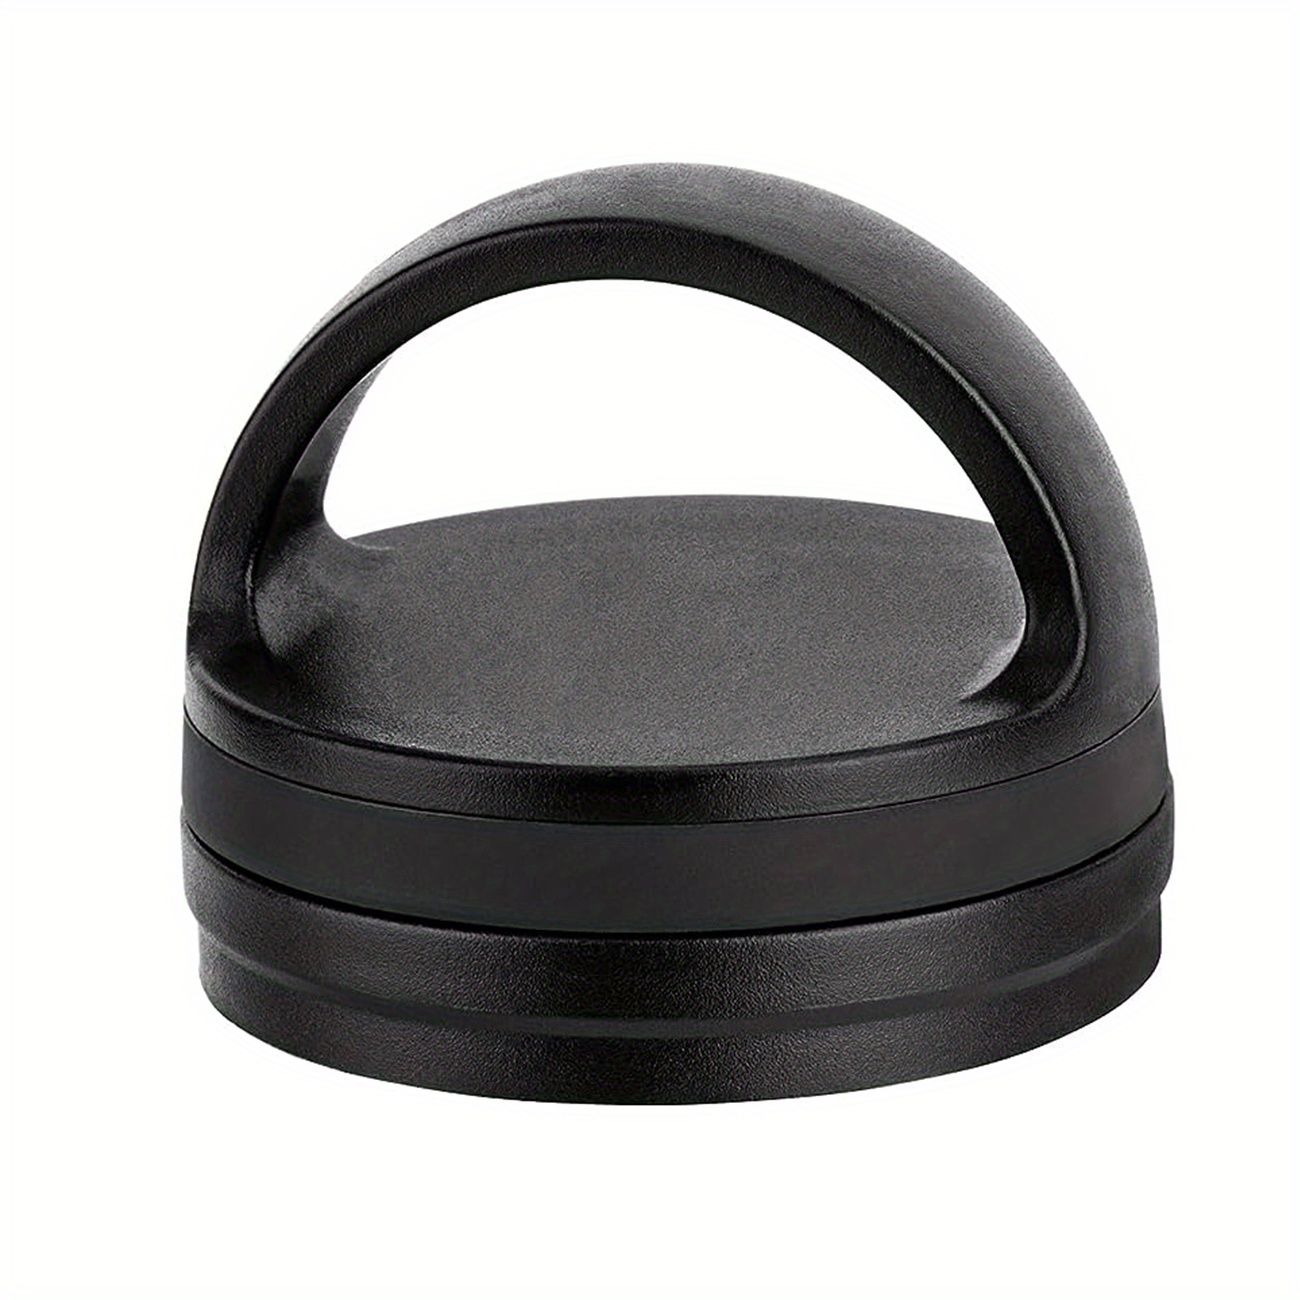 RTIC Jug Lid with Handle - Black for sale online